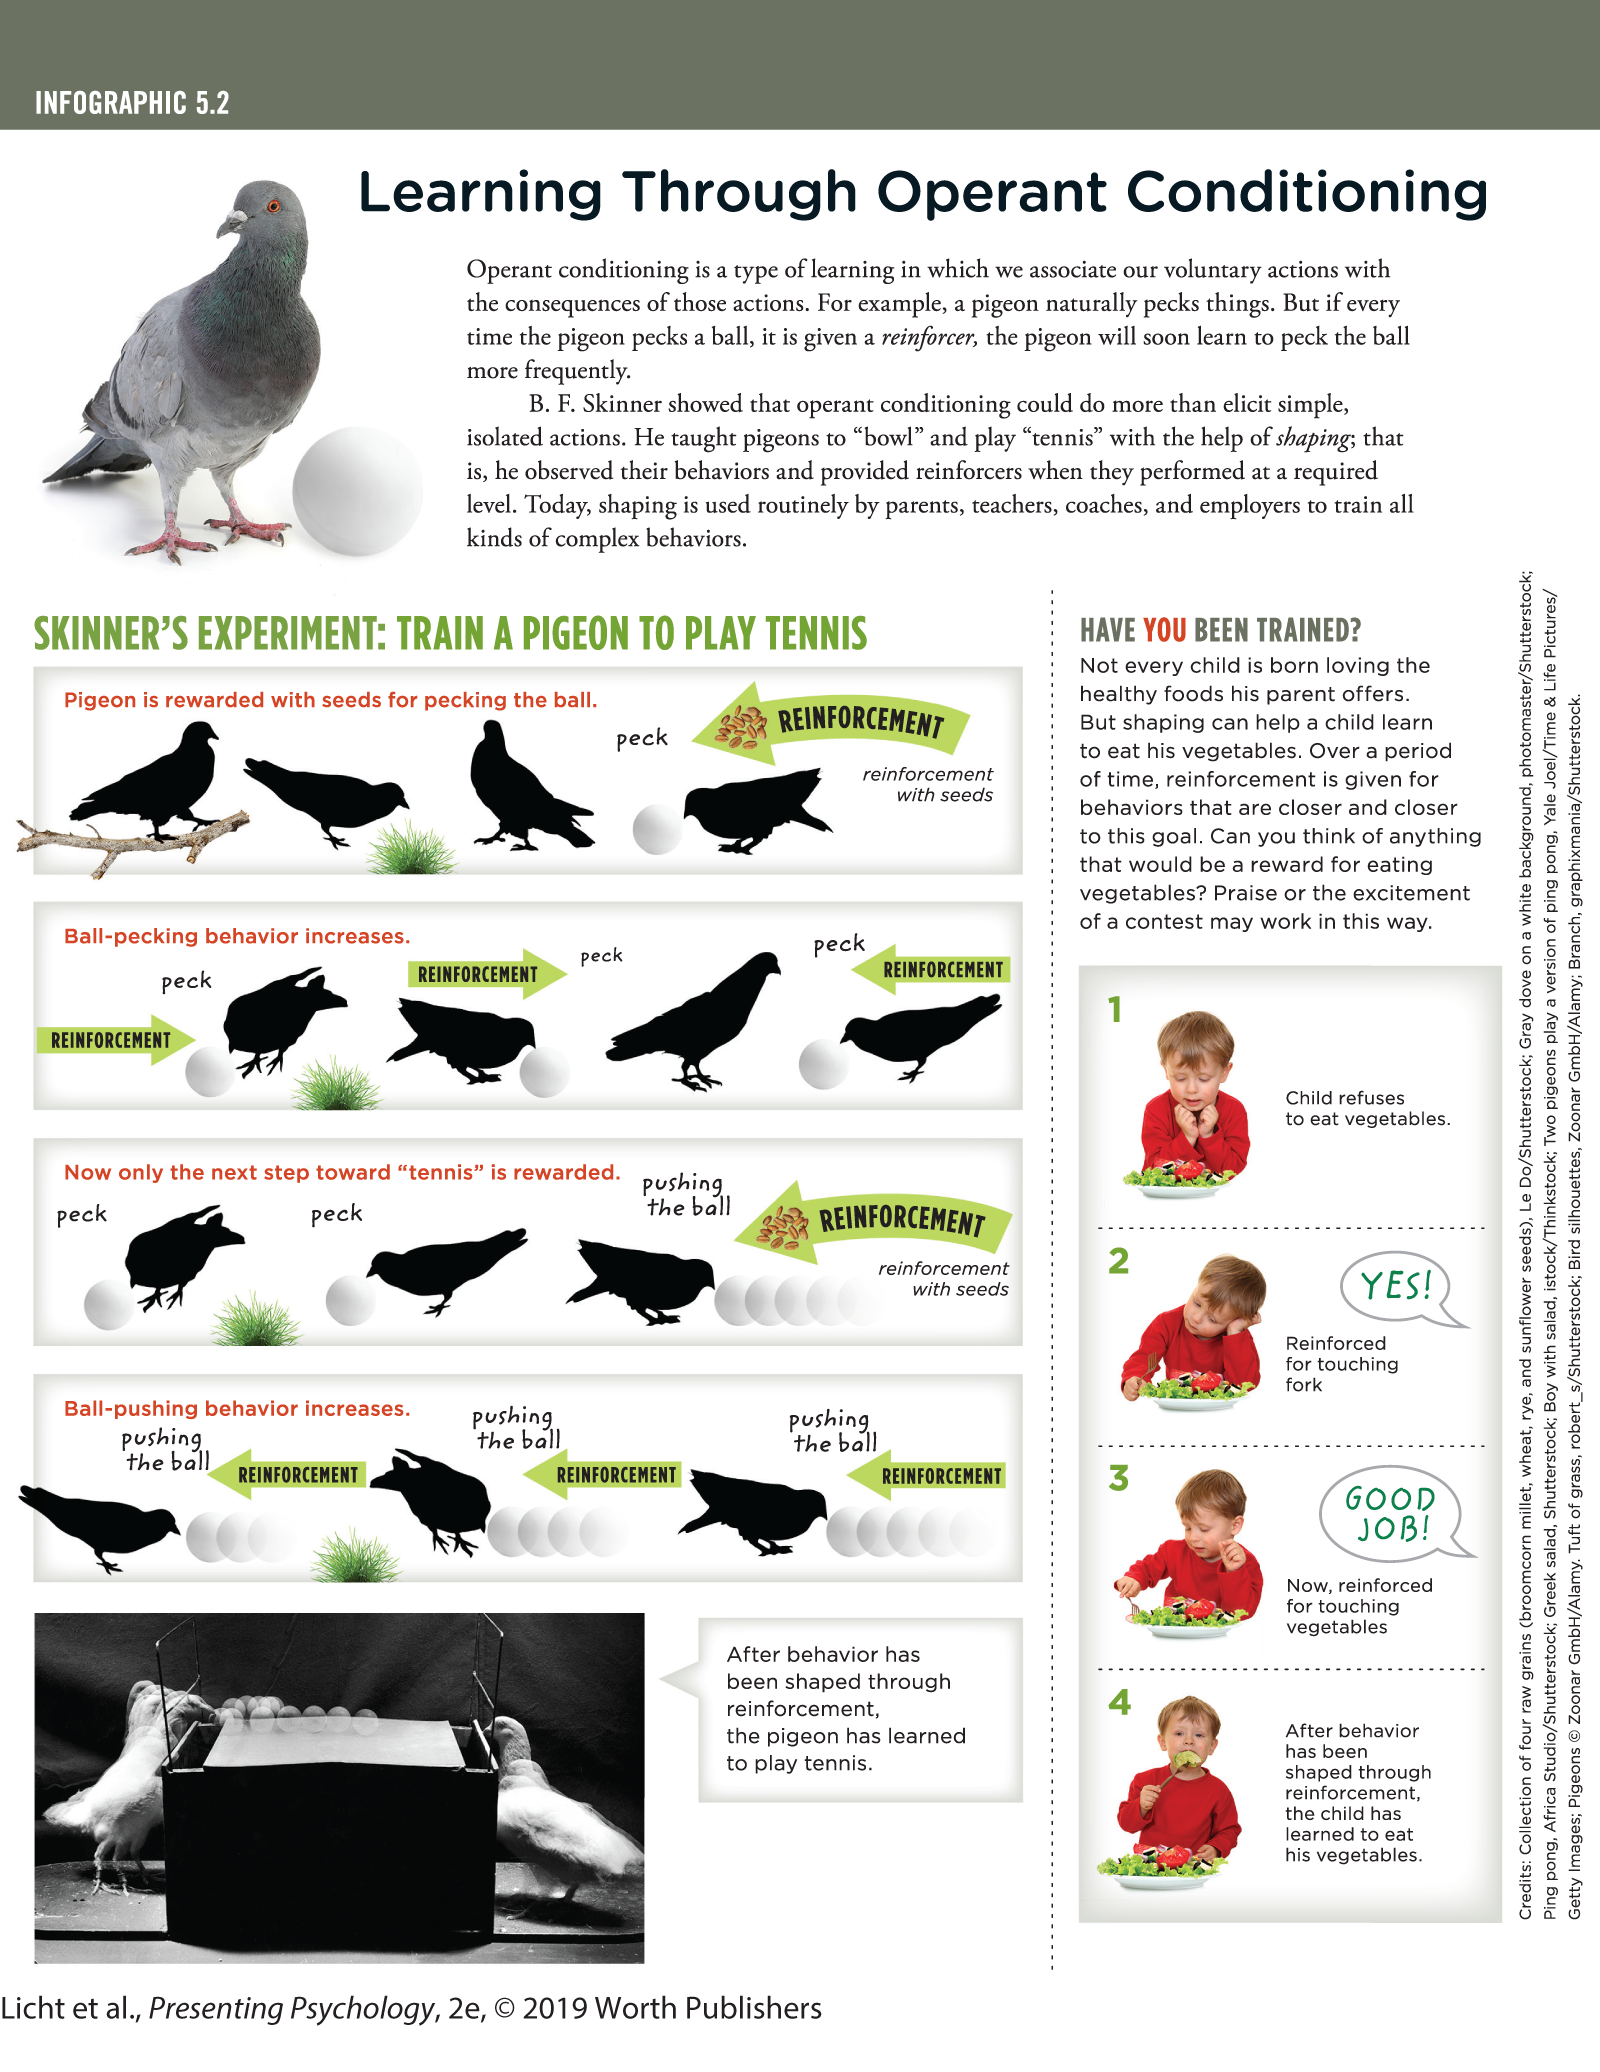 An infographic titled, Learning through Operant Conditioning explains the role of reinforcement in the process of training a pigeon to play tennis. You can read full description from the link below